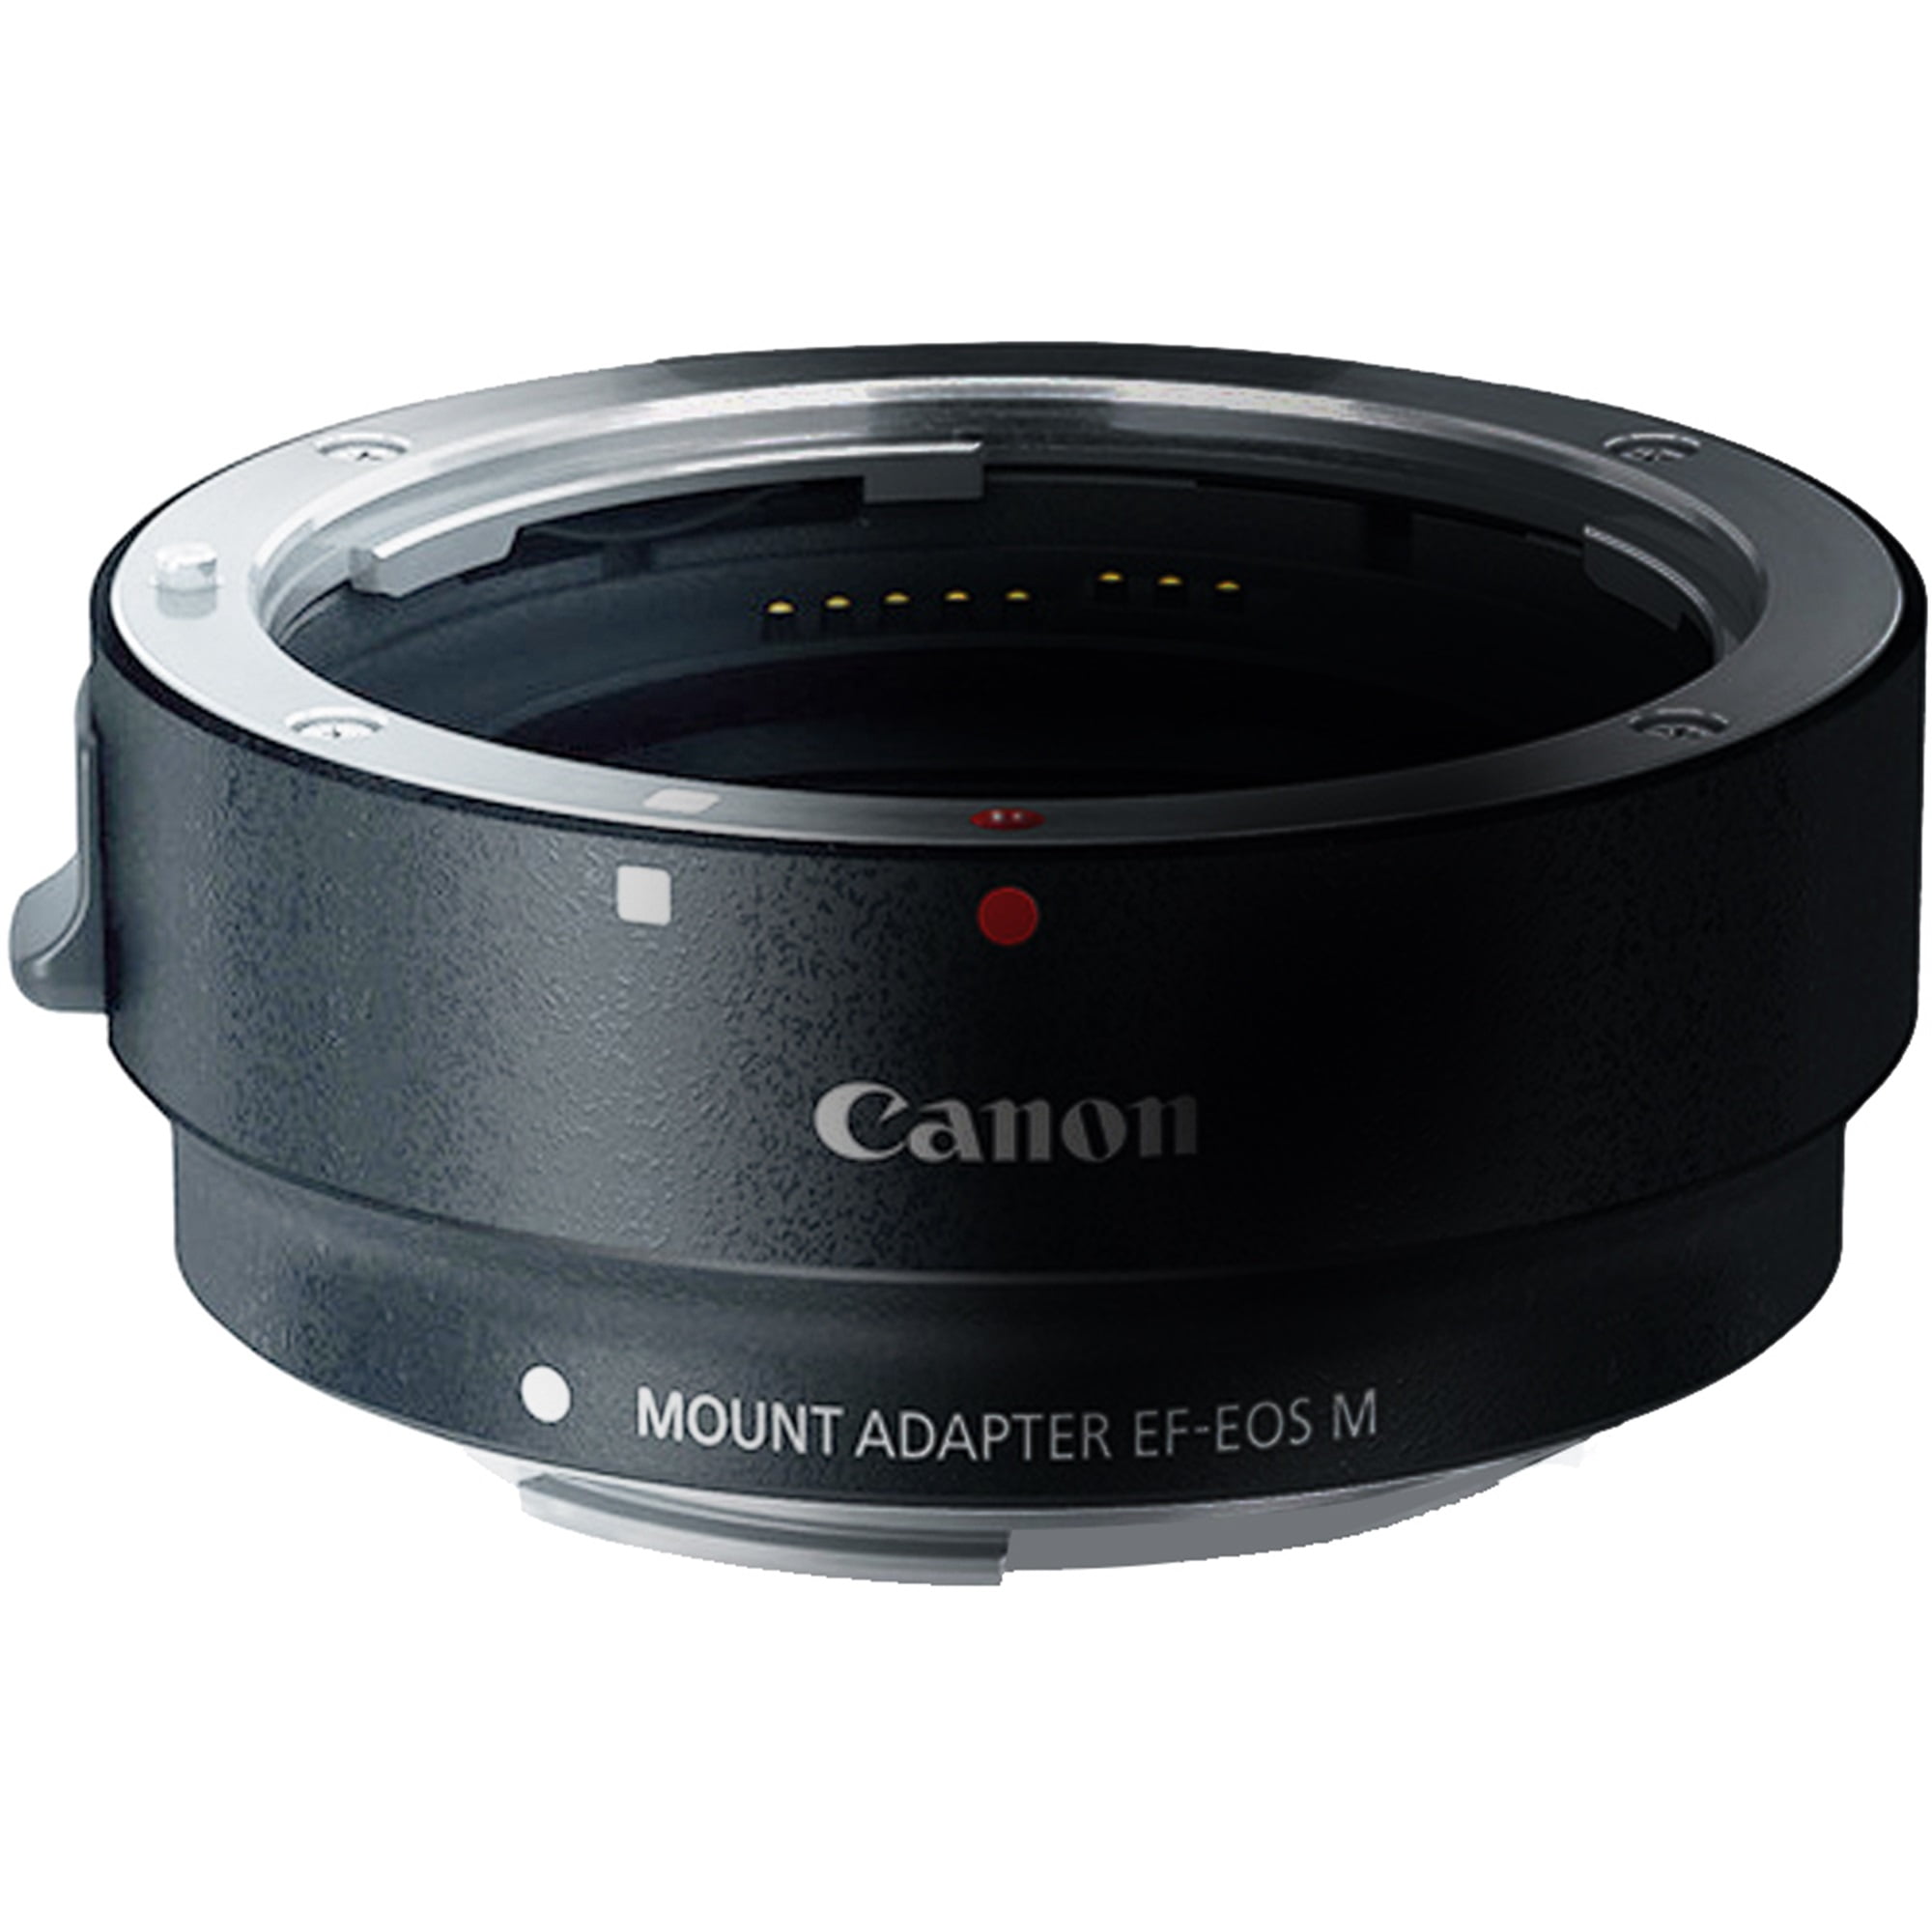 Canon EF 50mm f/1.8 STM Lens with EF-M Adapter for Canon EOS